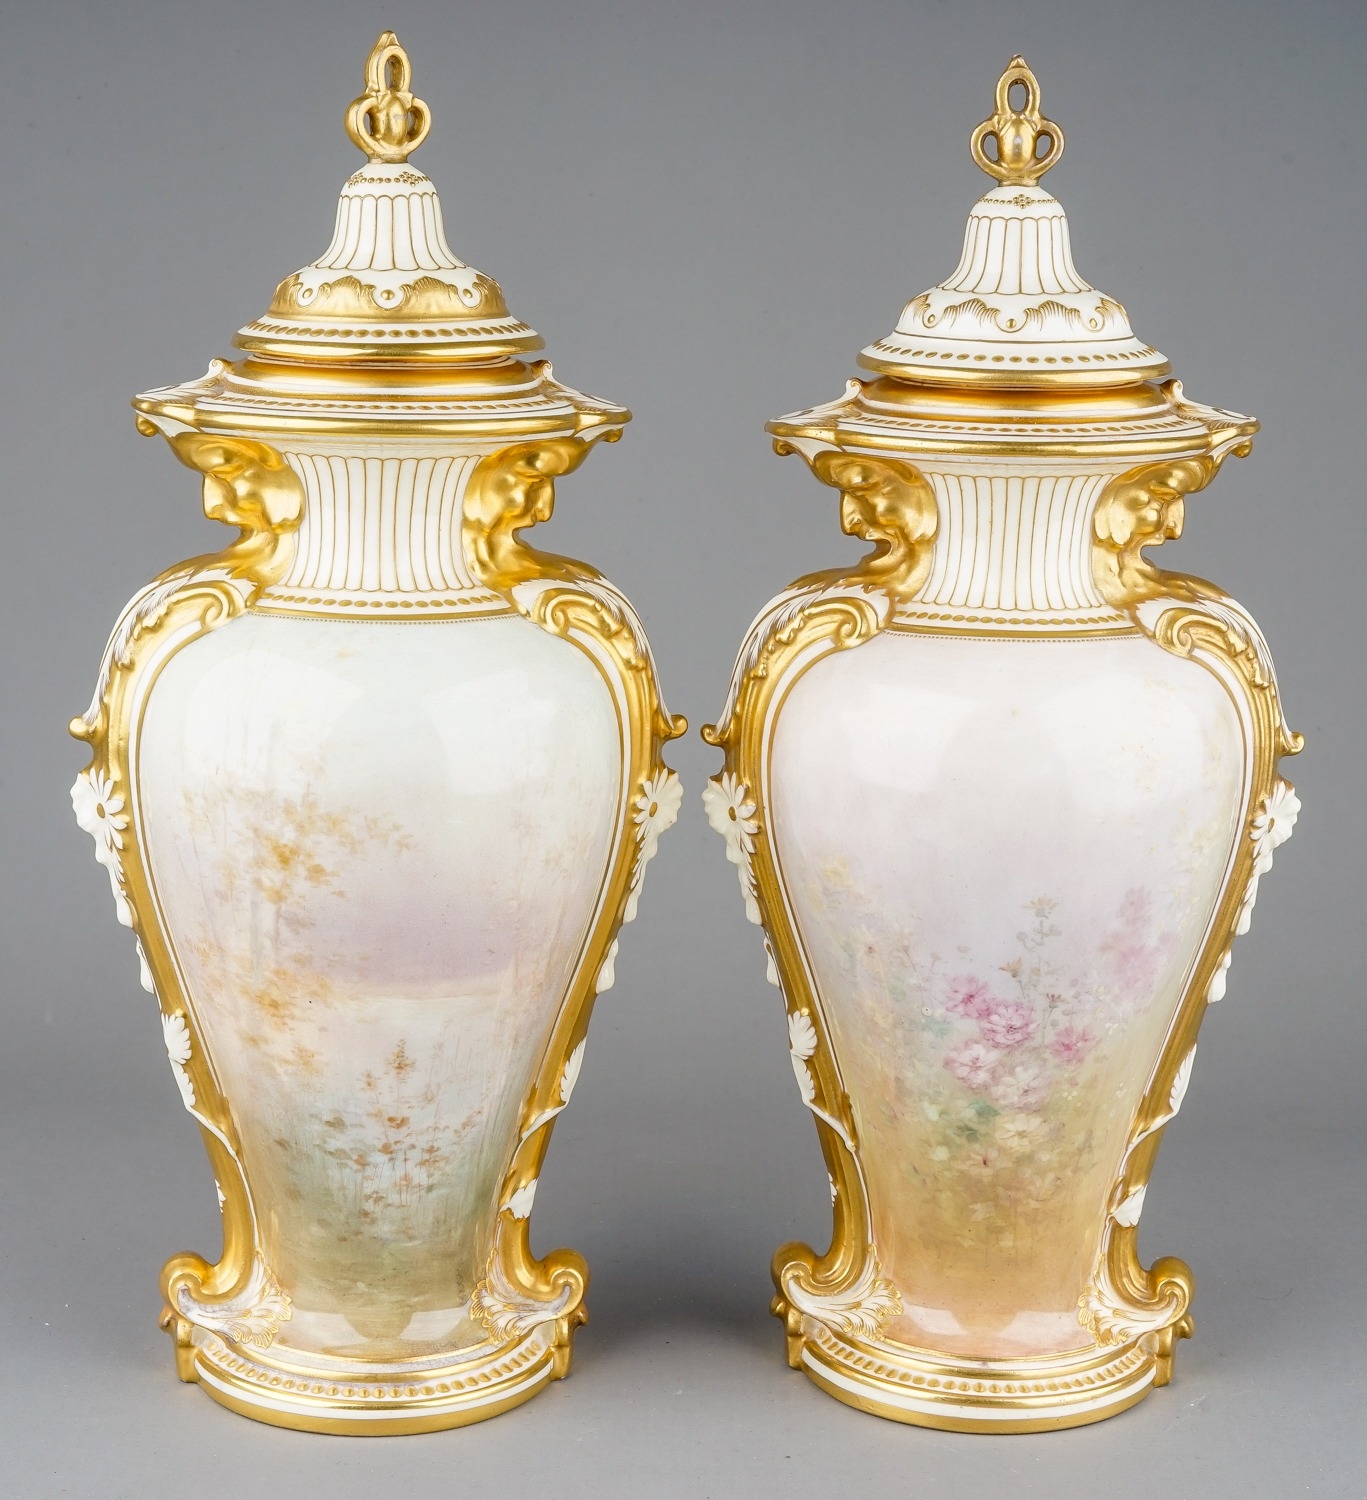 Arthur Leslie: a pair of early 20th Century Royal Doulton vases and covers, urn shaped bodies - Image 3 of 7